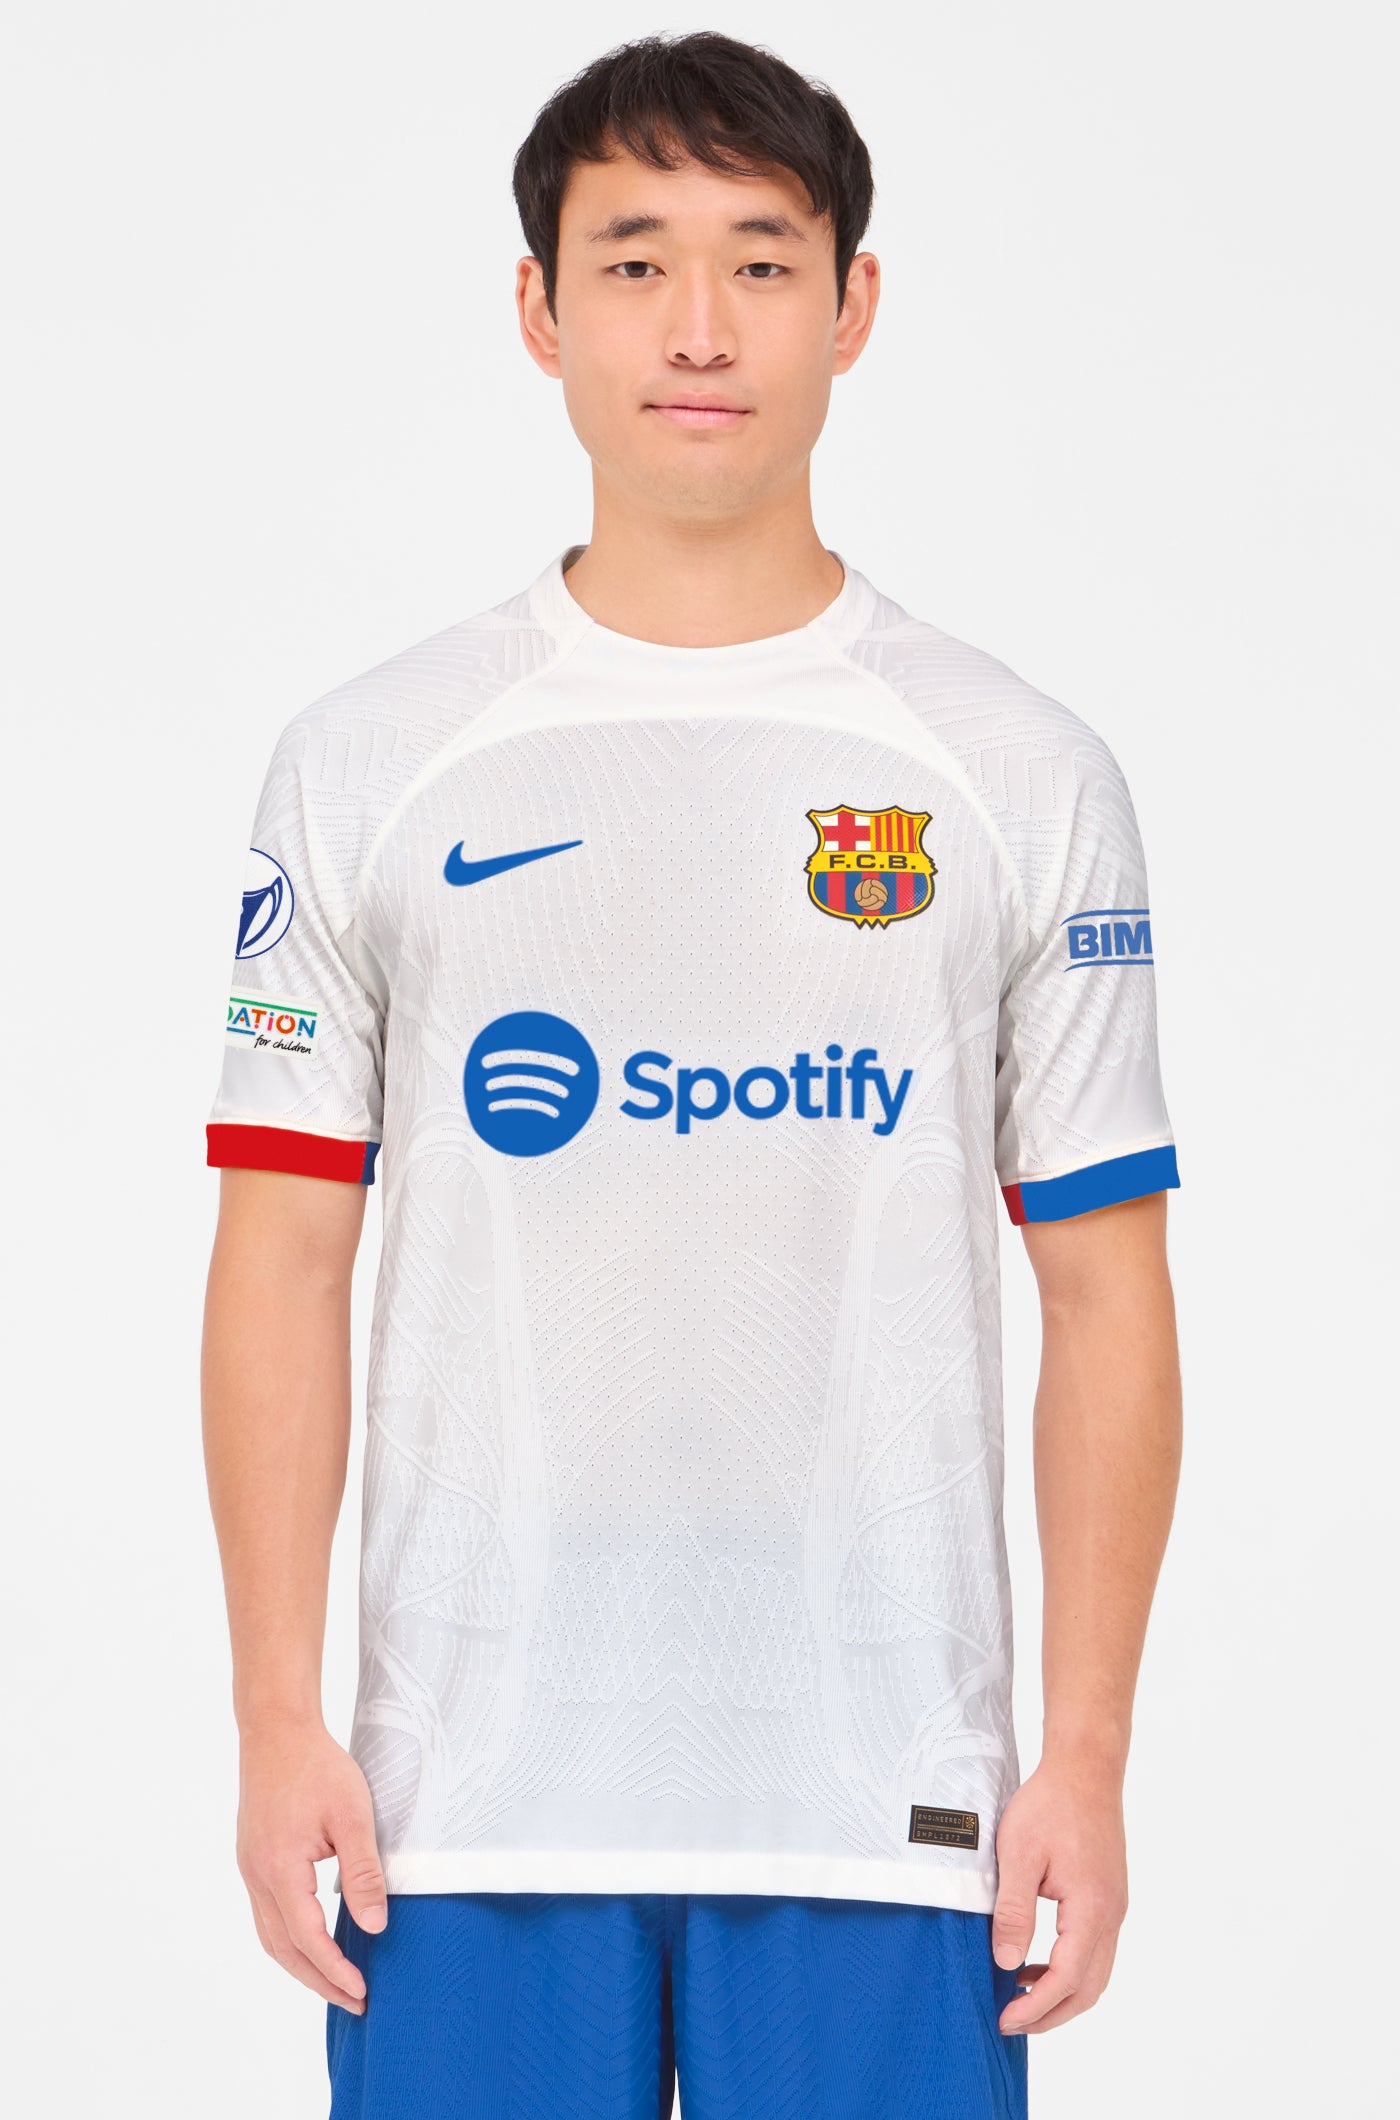 UWCL FC Barcelona away shirt 23/24 Player's Edition - PAREDES